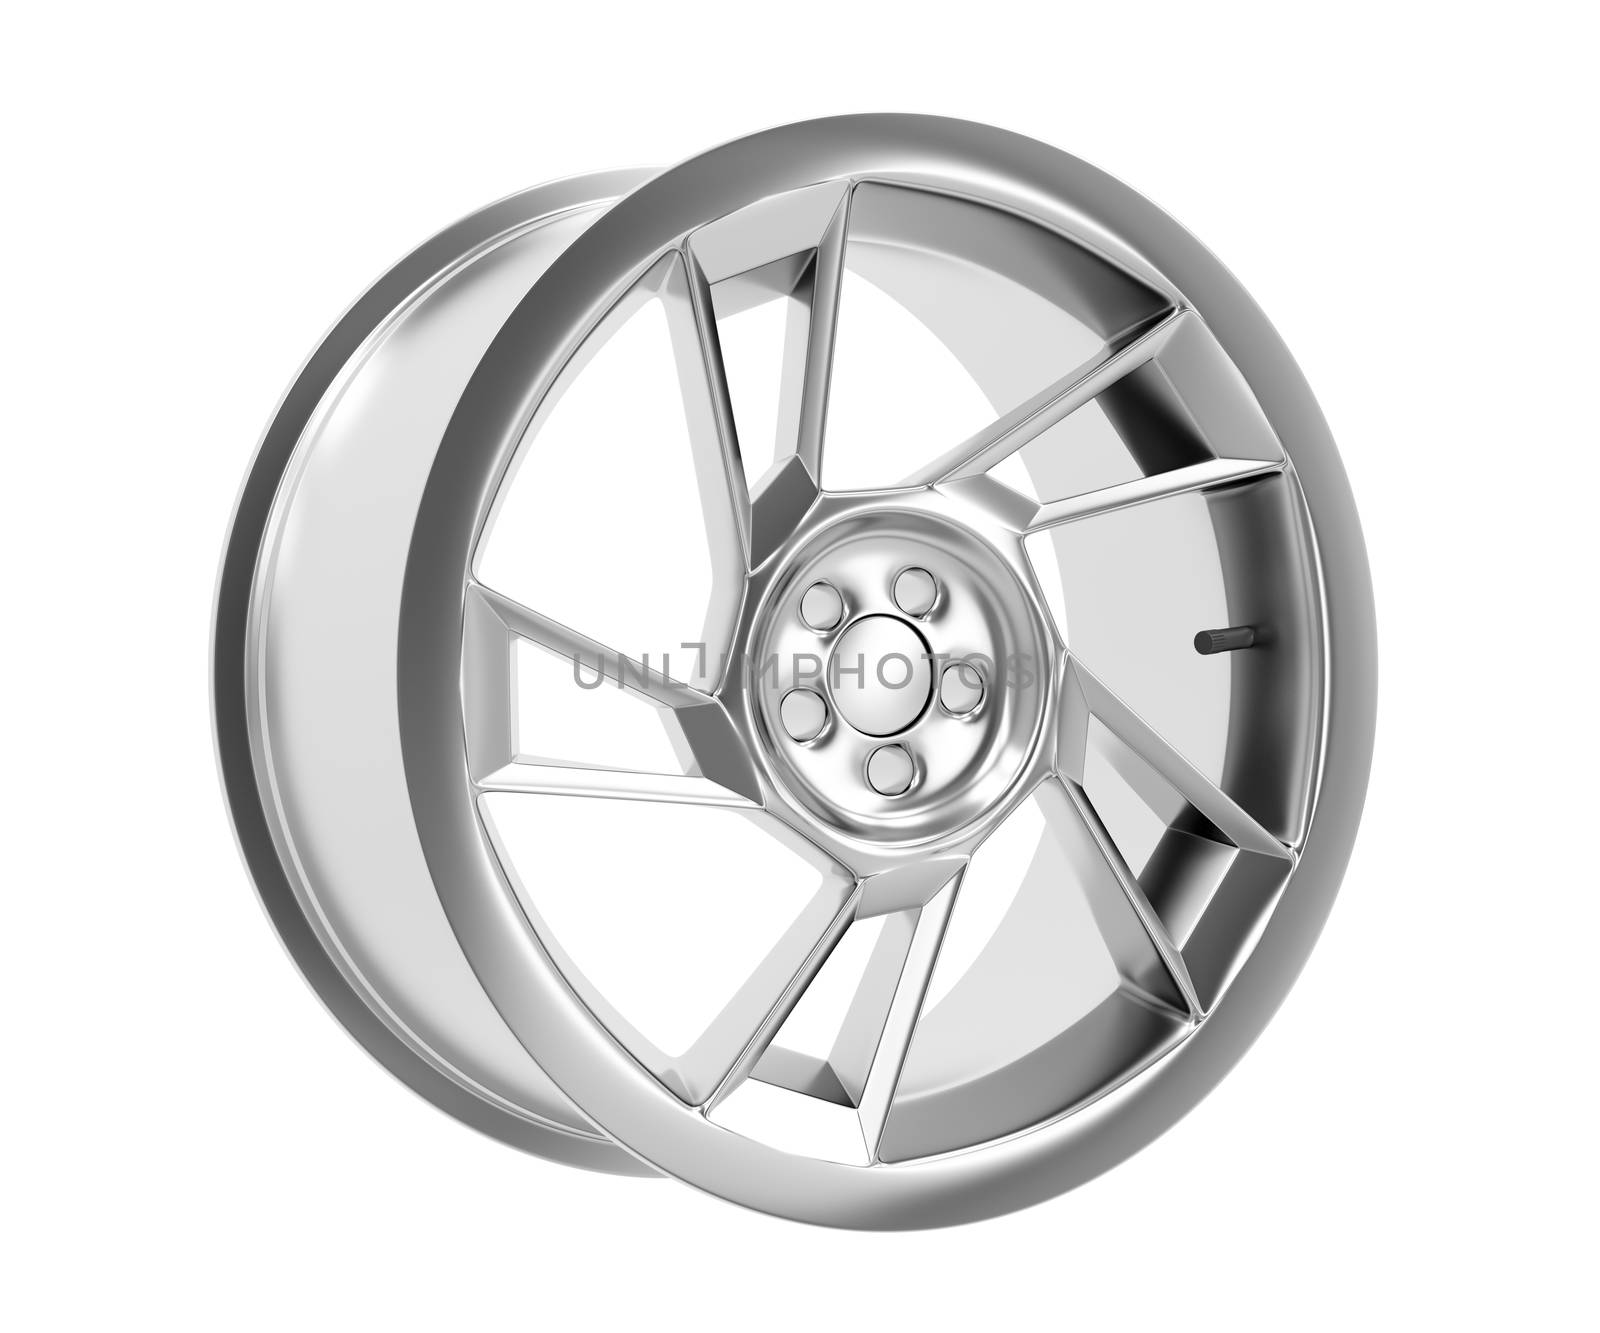 Car rim by magraphics